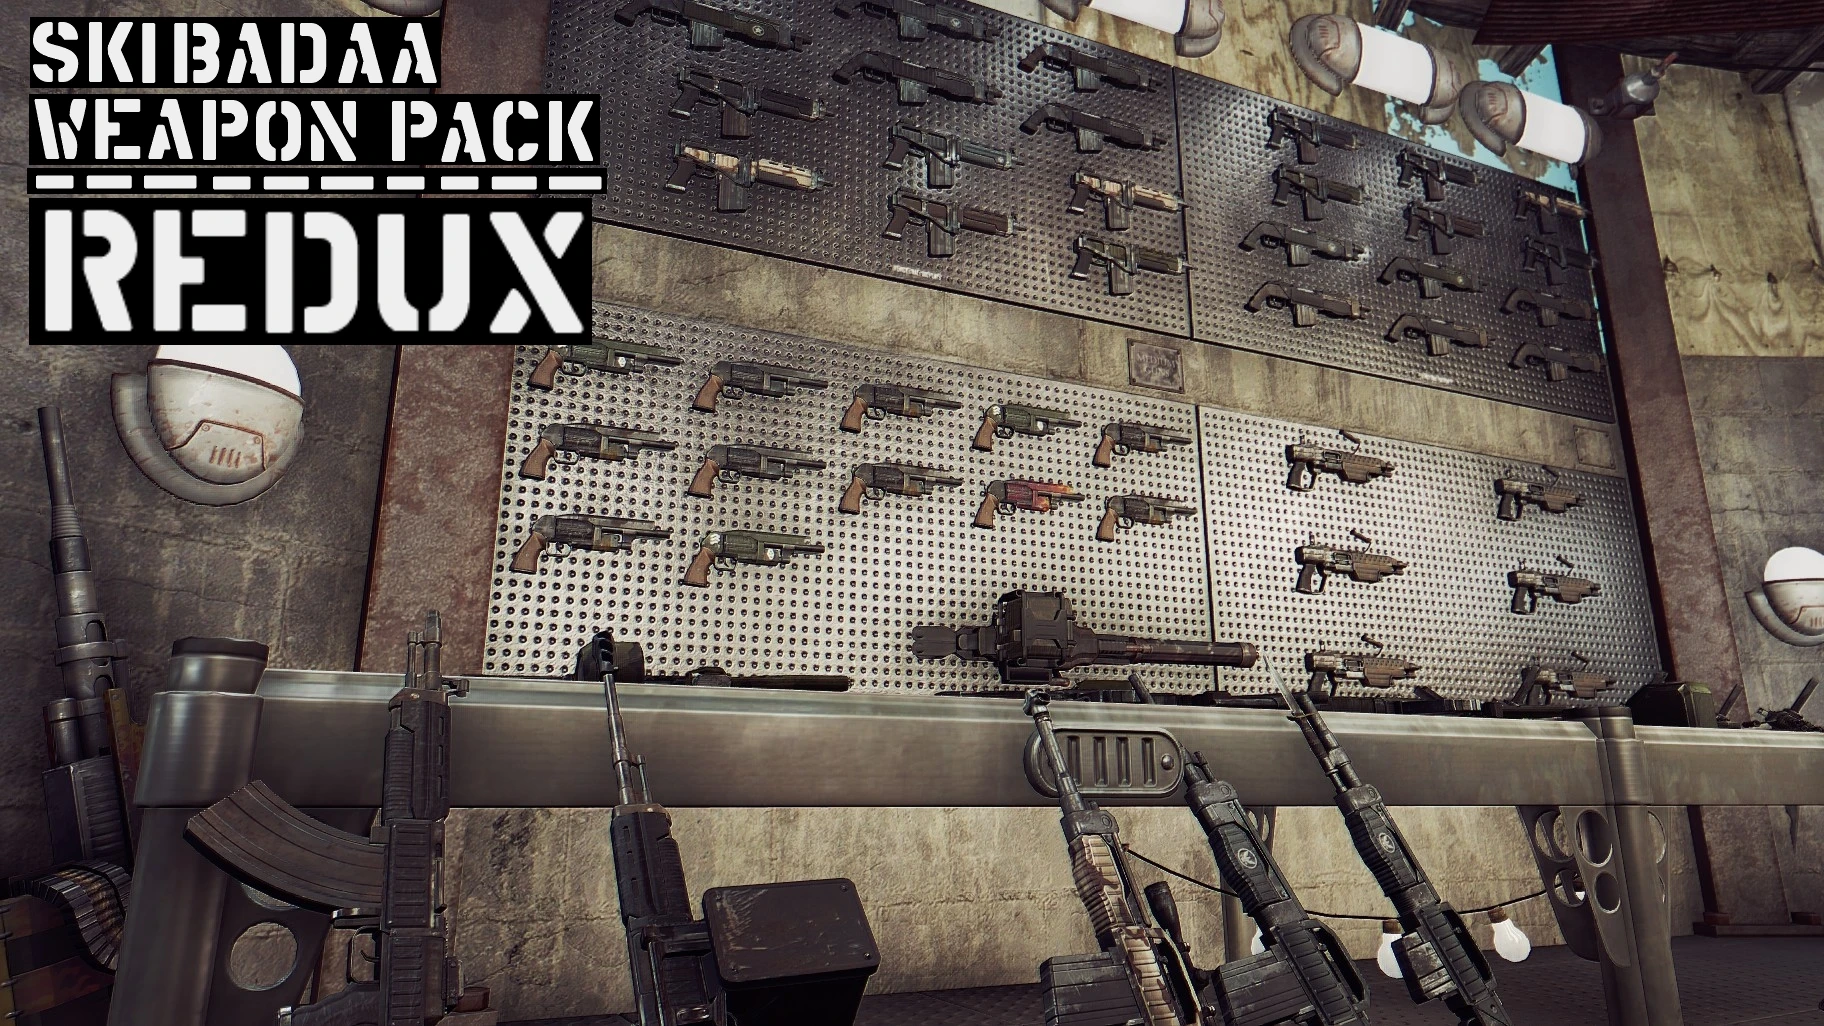 Weapon overhaul pack fallout 4 фото 6